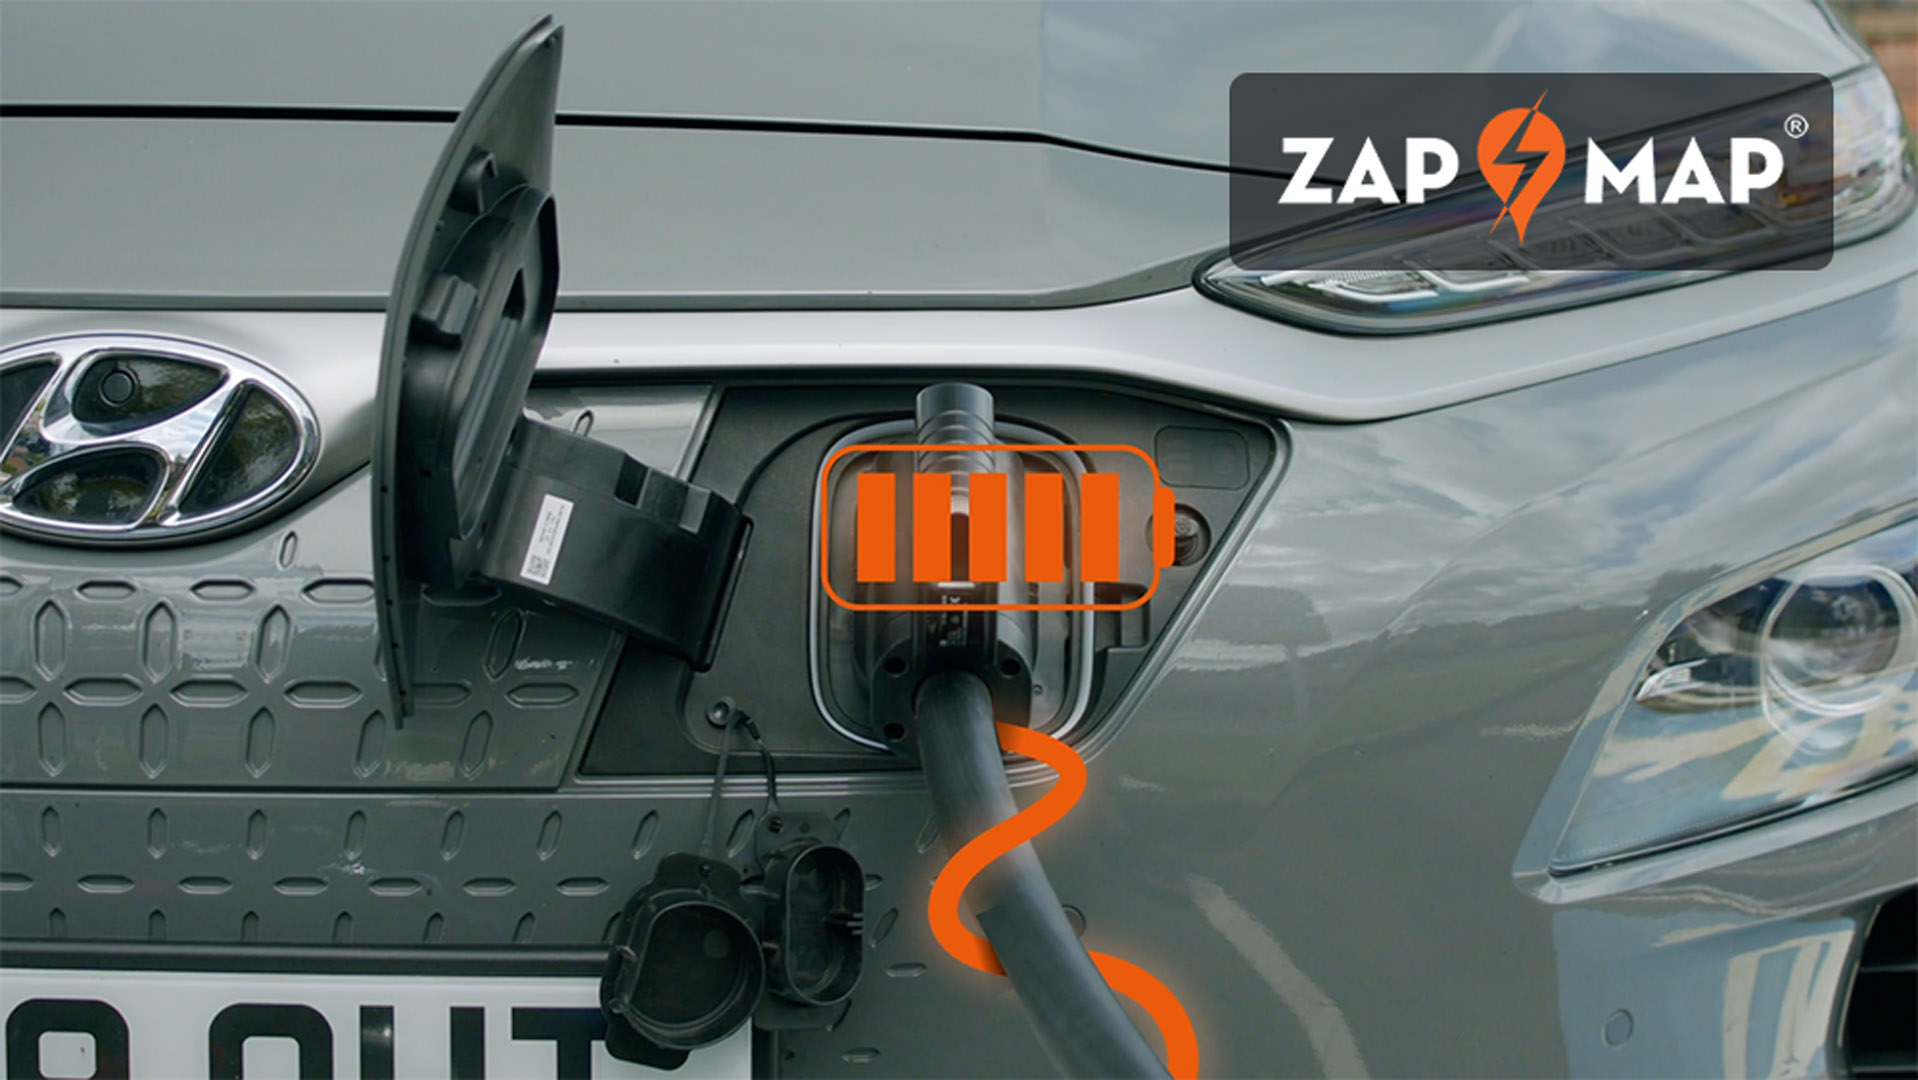 Zap-Pay charging